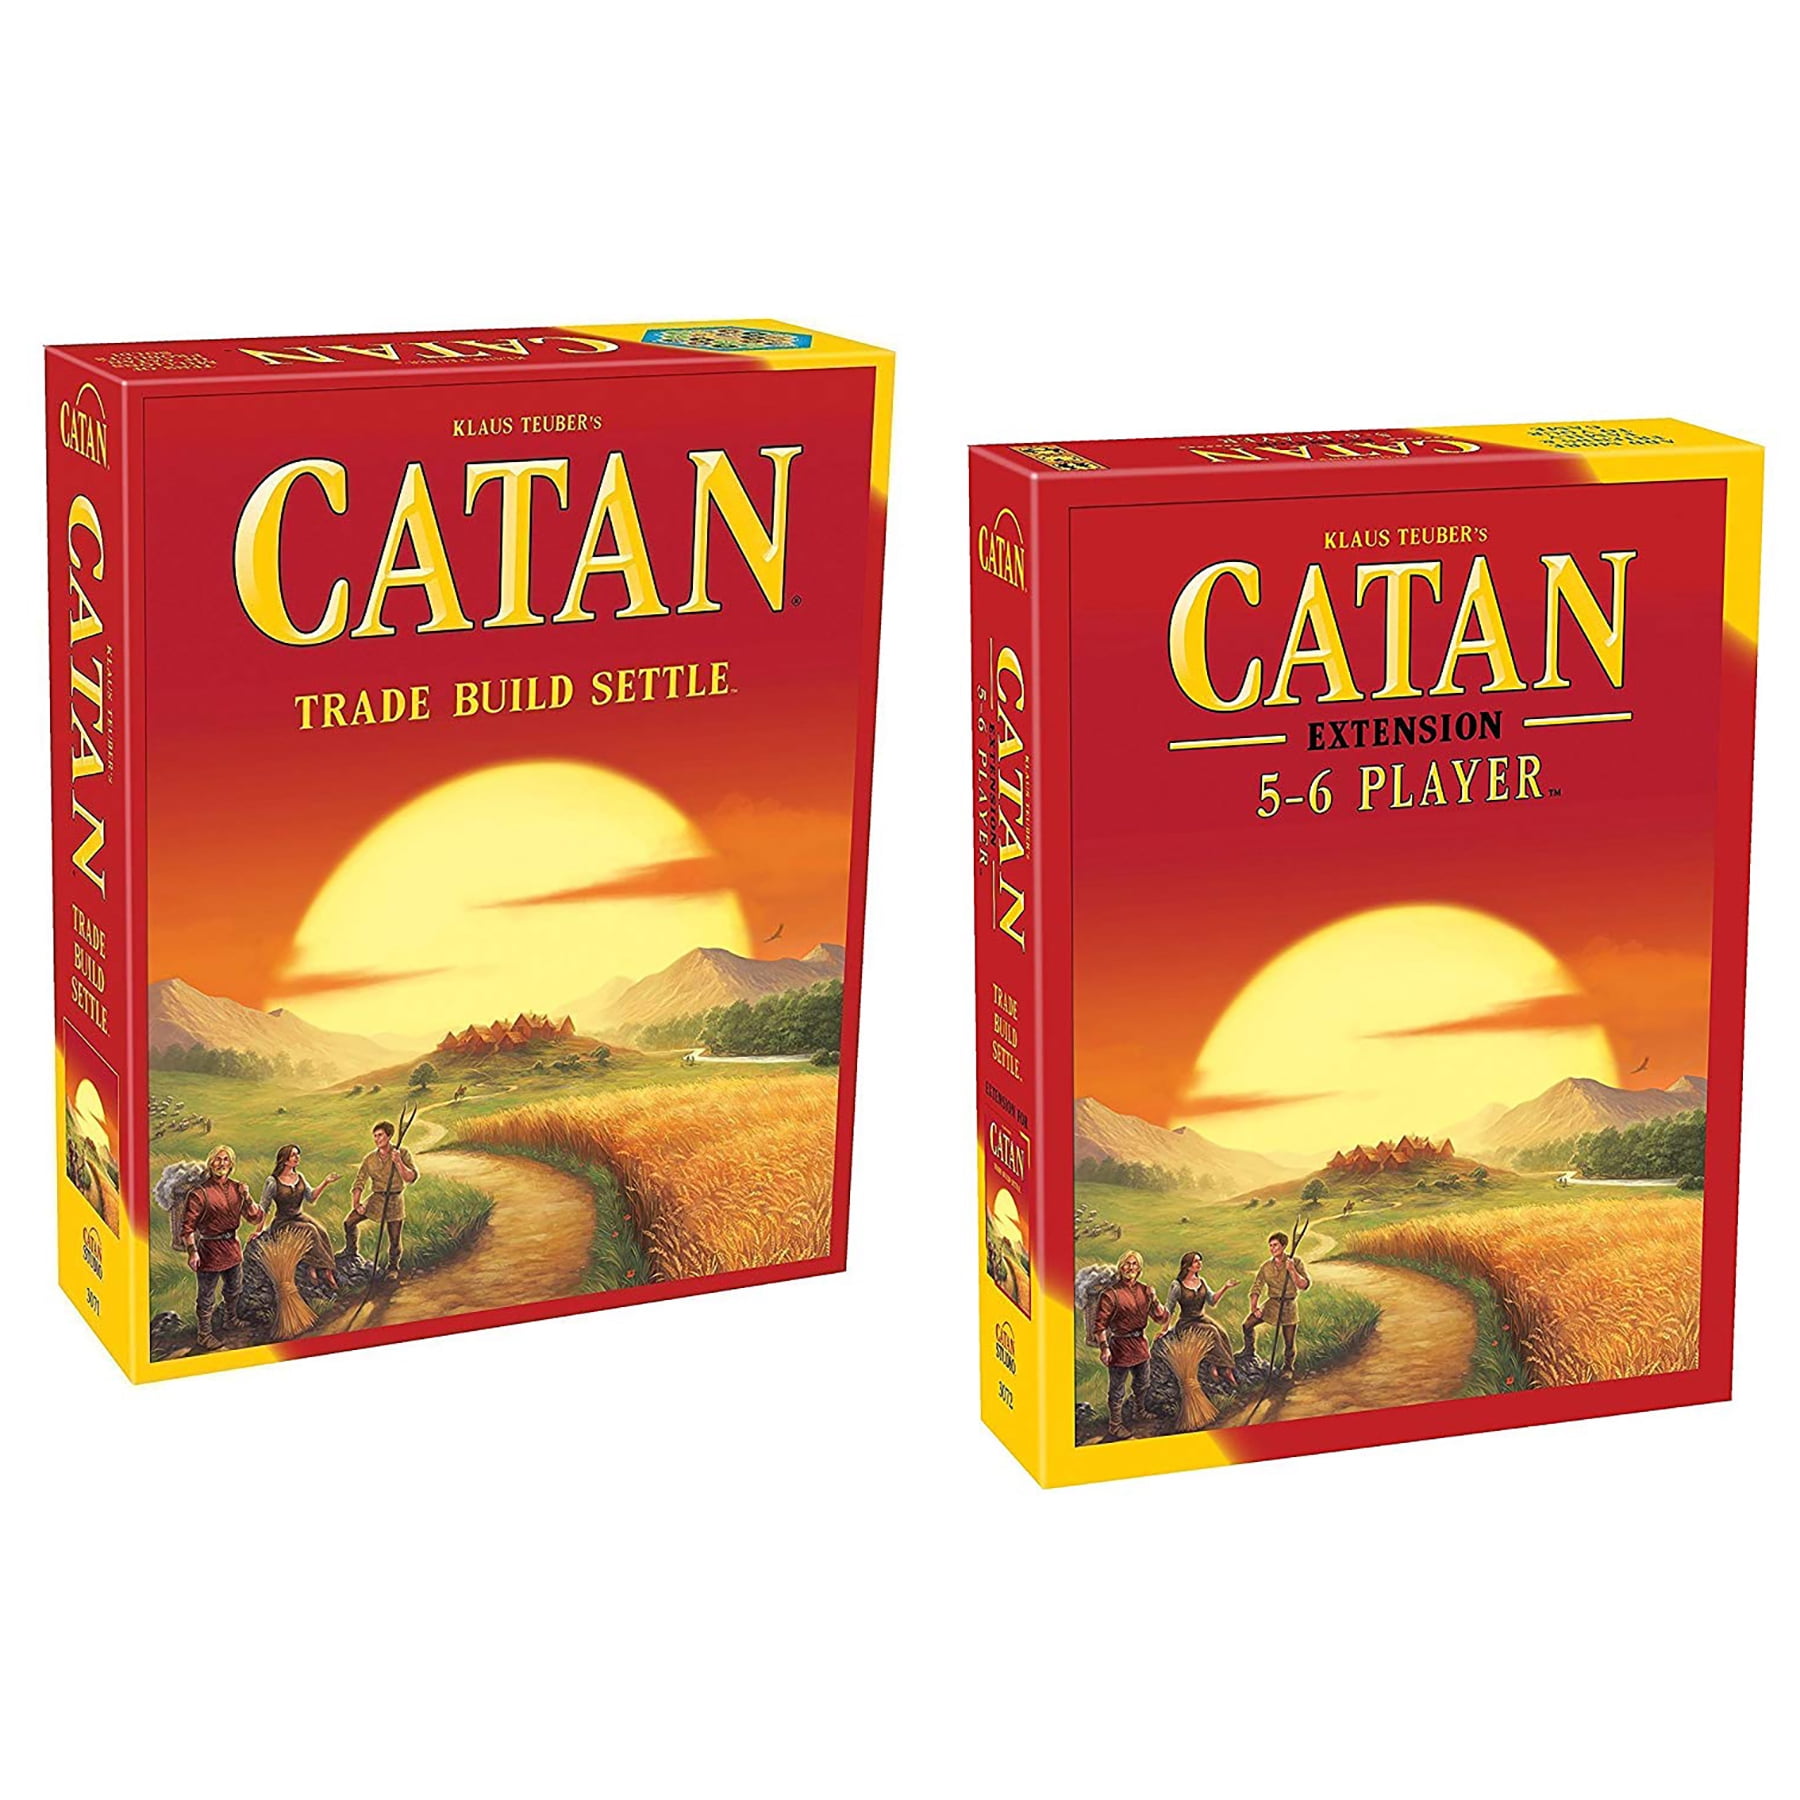 You Pick NEW! Catan Trade Build Settle Game Replacement Pieces Parts 